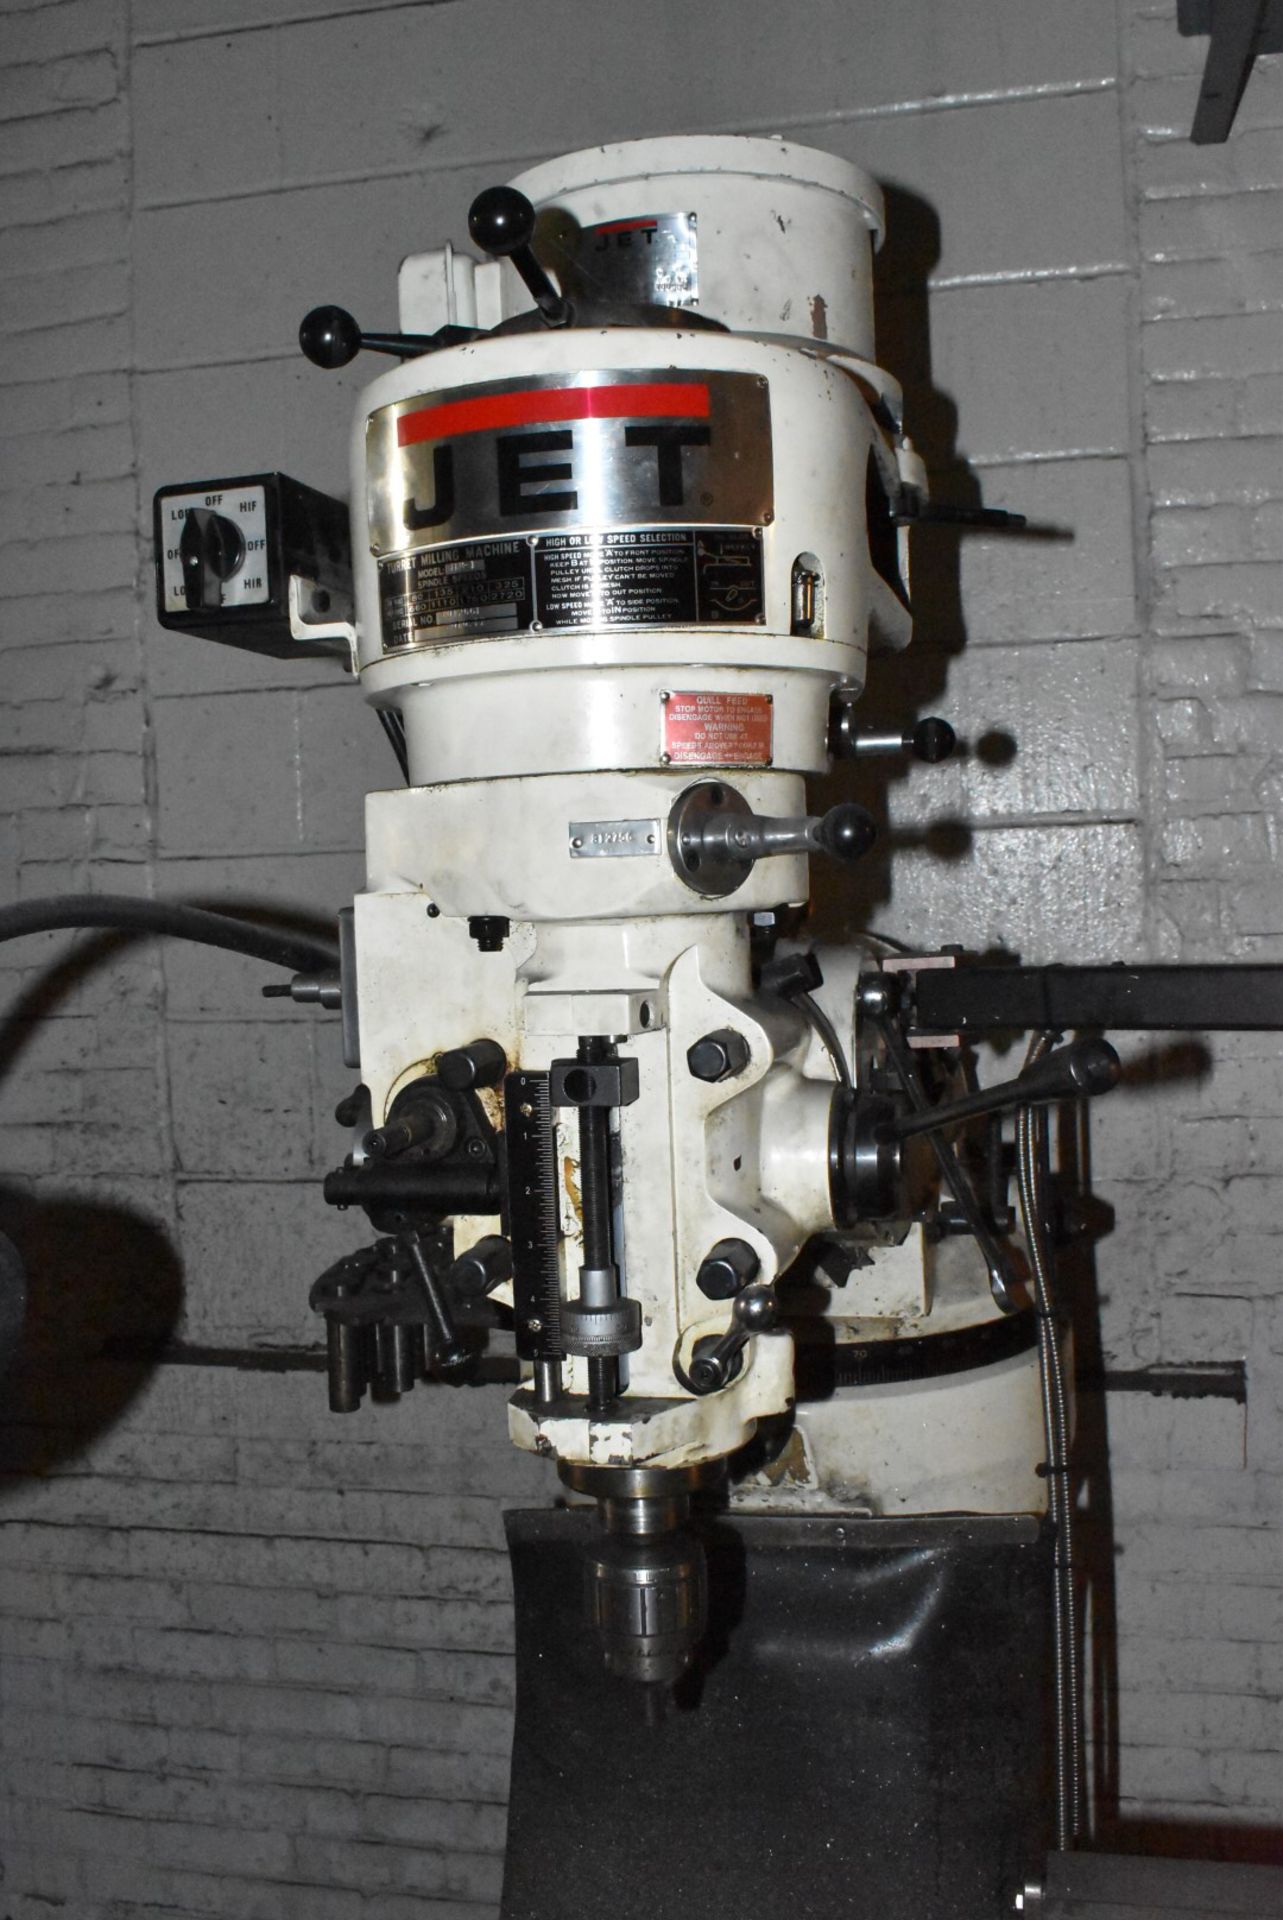 JET (2010) JTM-1 VERTICAL TURRET MILLING MACHINE WITH 9" X 42" TABLE, SPEEDS TO 2720 RPM IN 8 STEPS, - Image 4 of 9